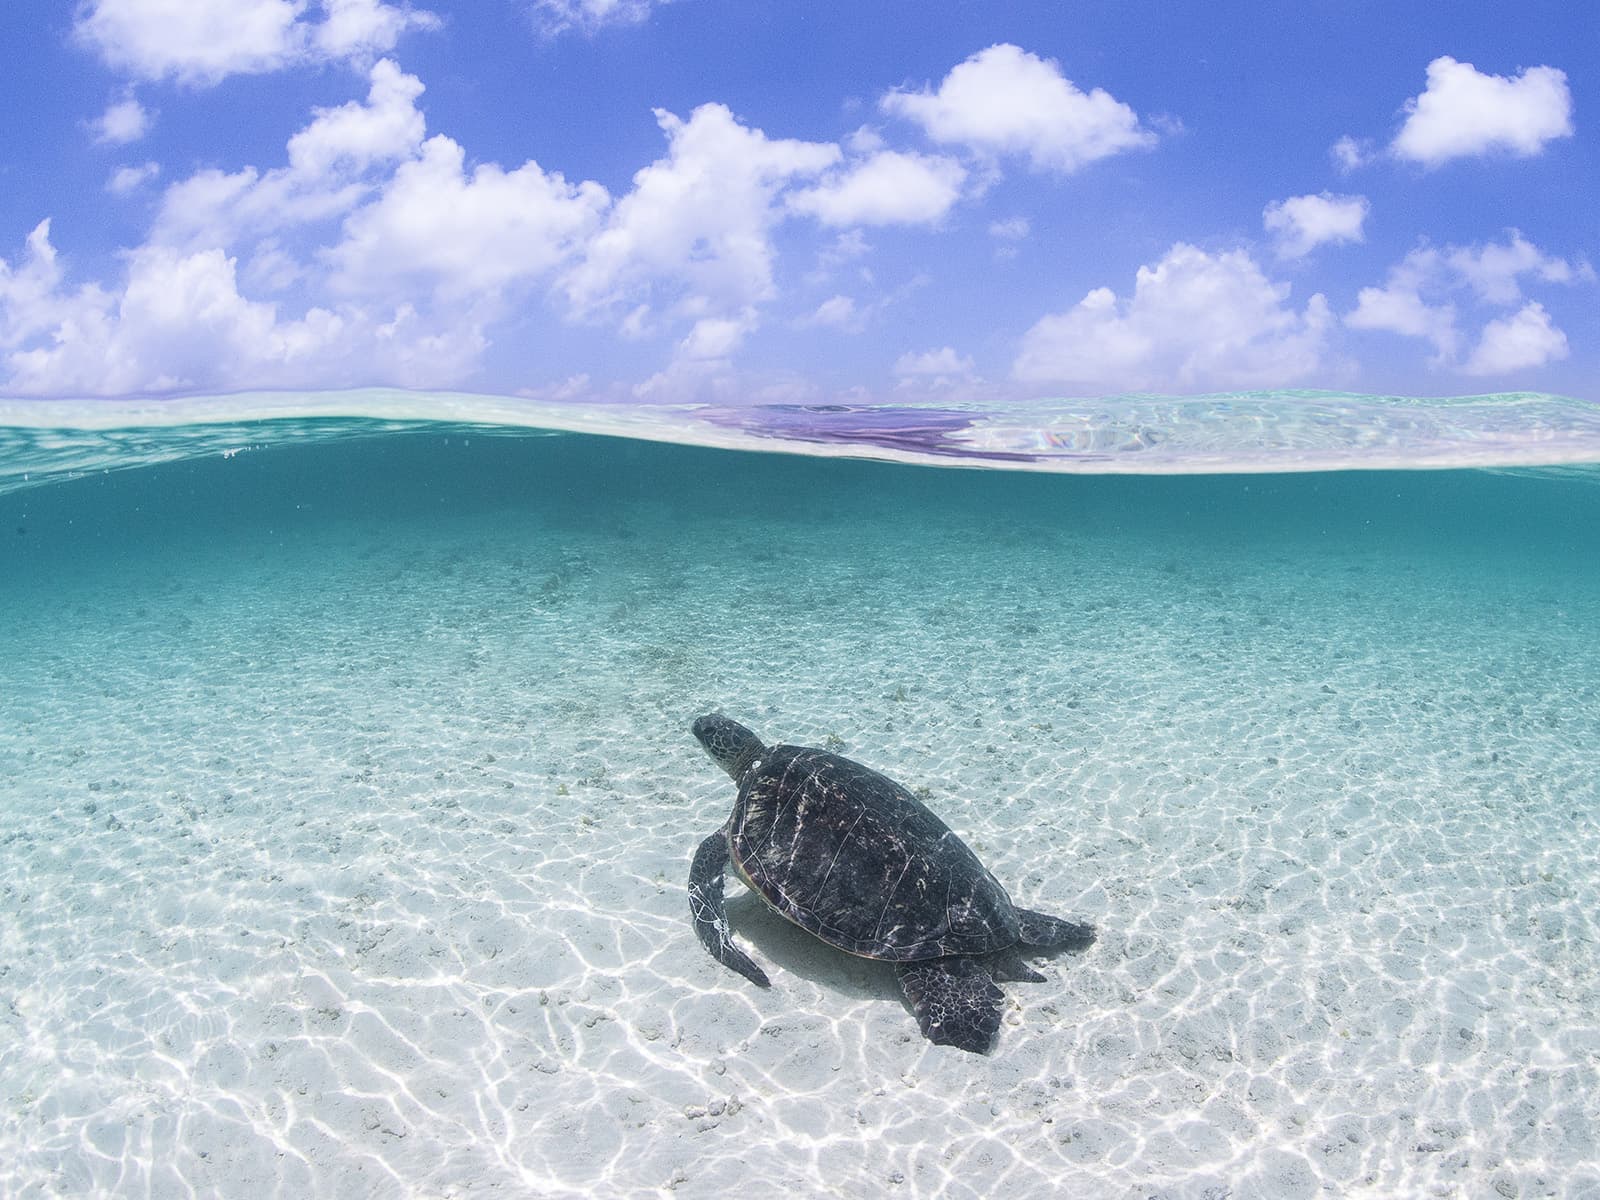 A green sea turtle swims near French Frigate Shoals